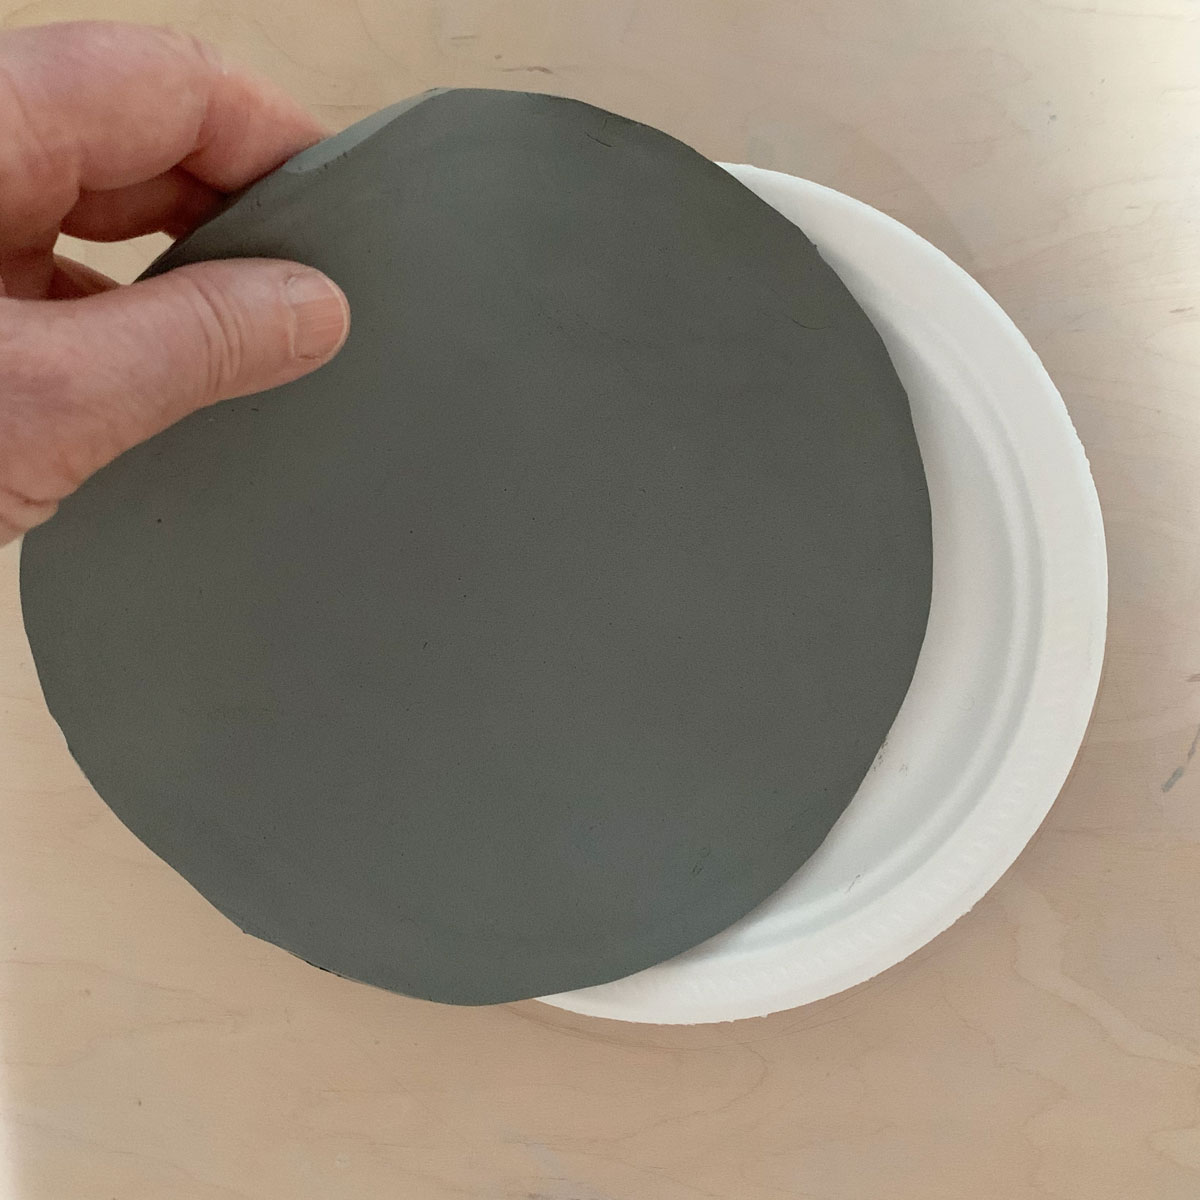 Round clay slab on a plate